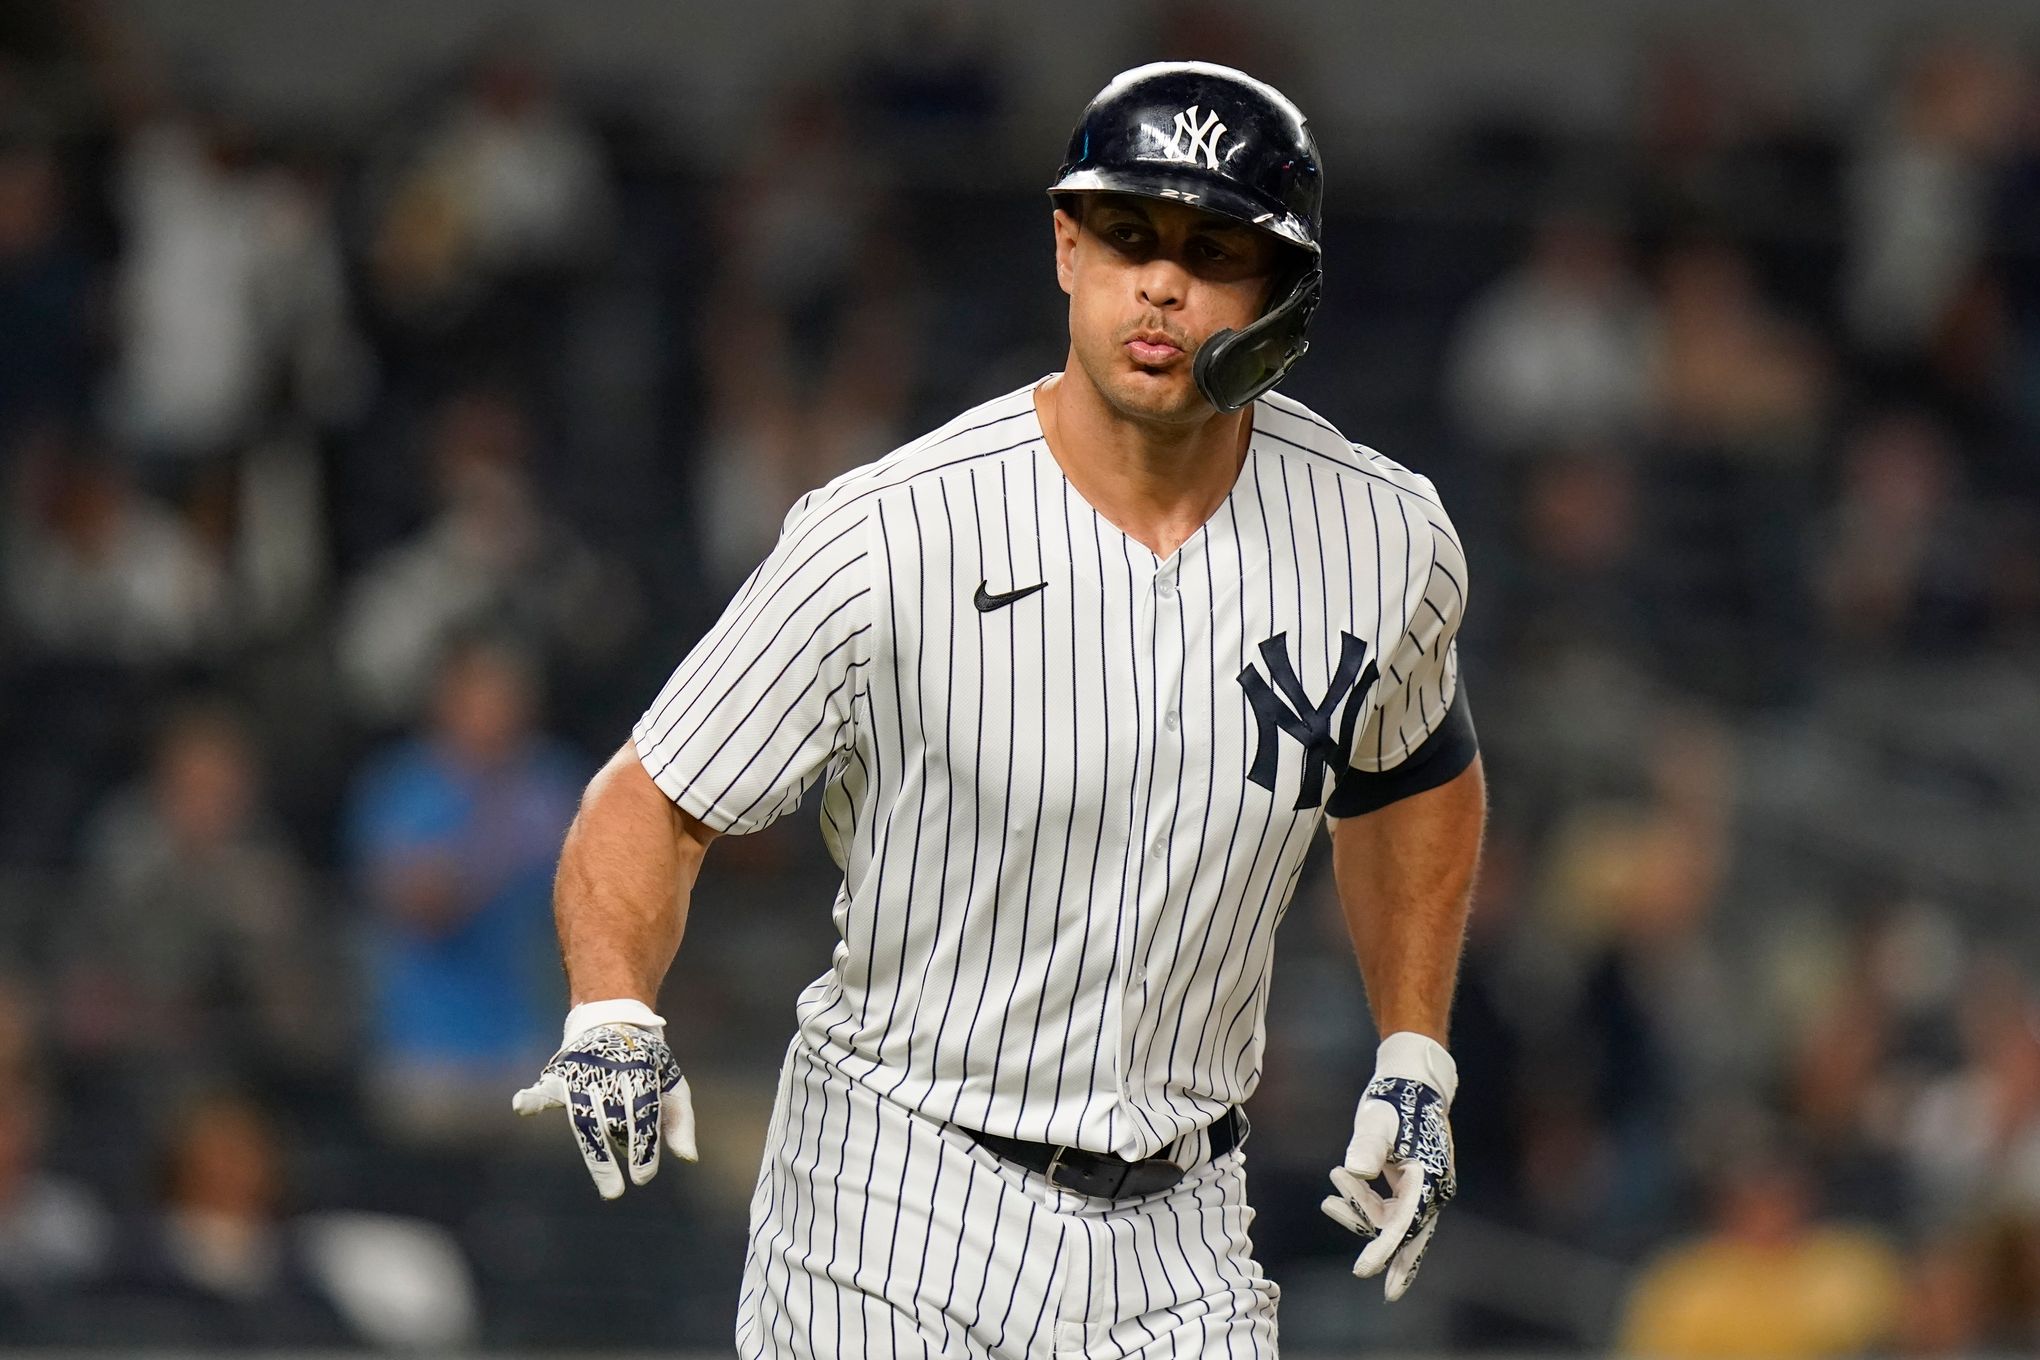 Gallo's 1st homer in pinstripes gives Yanks 5-3 win